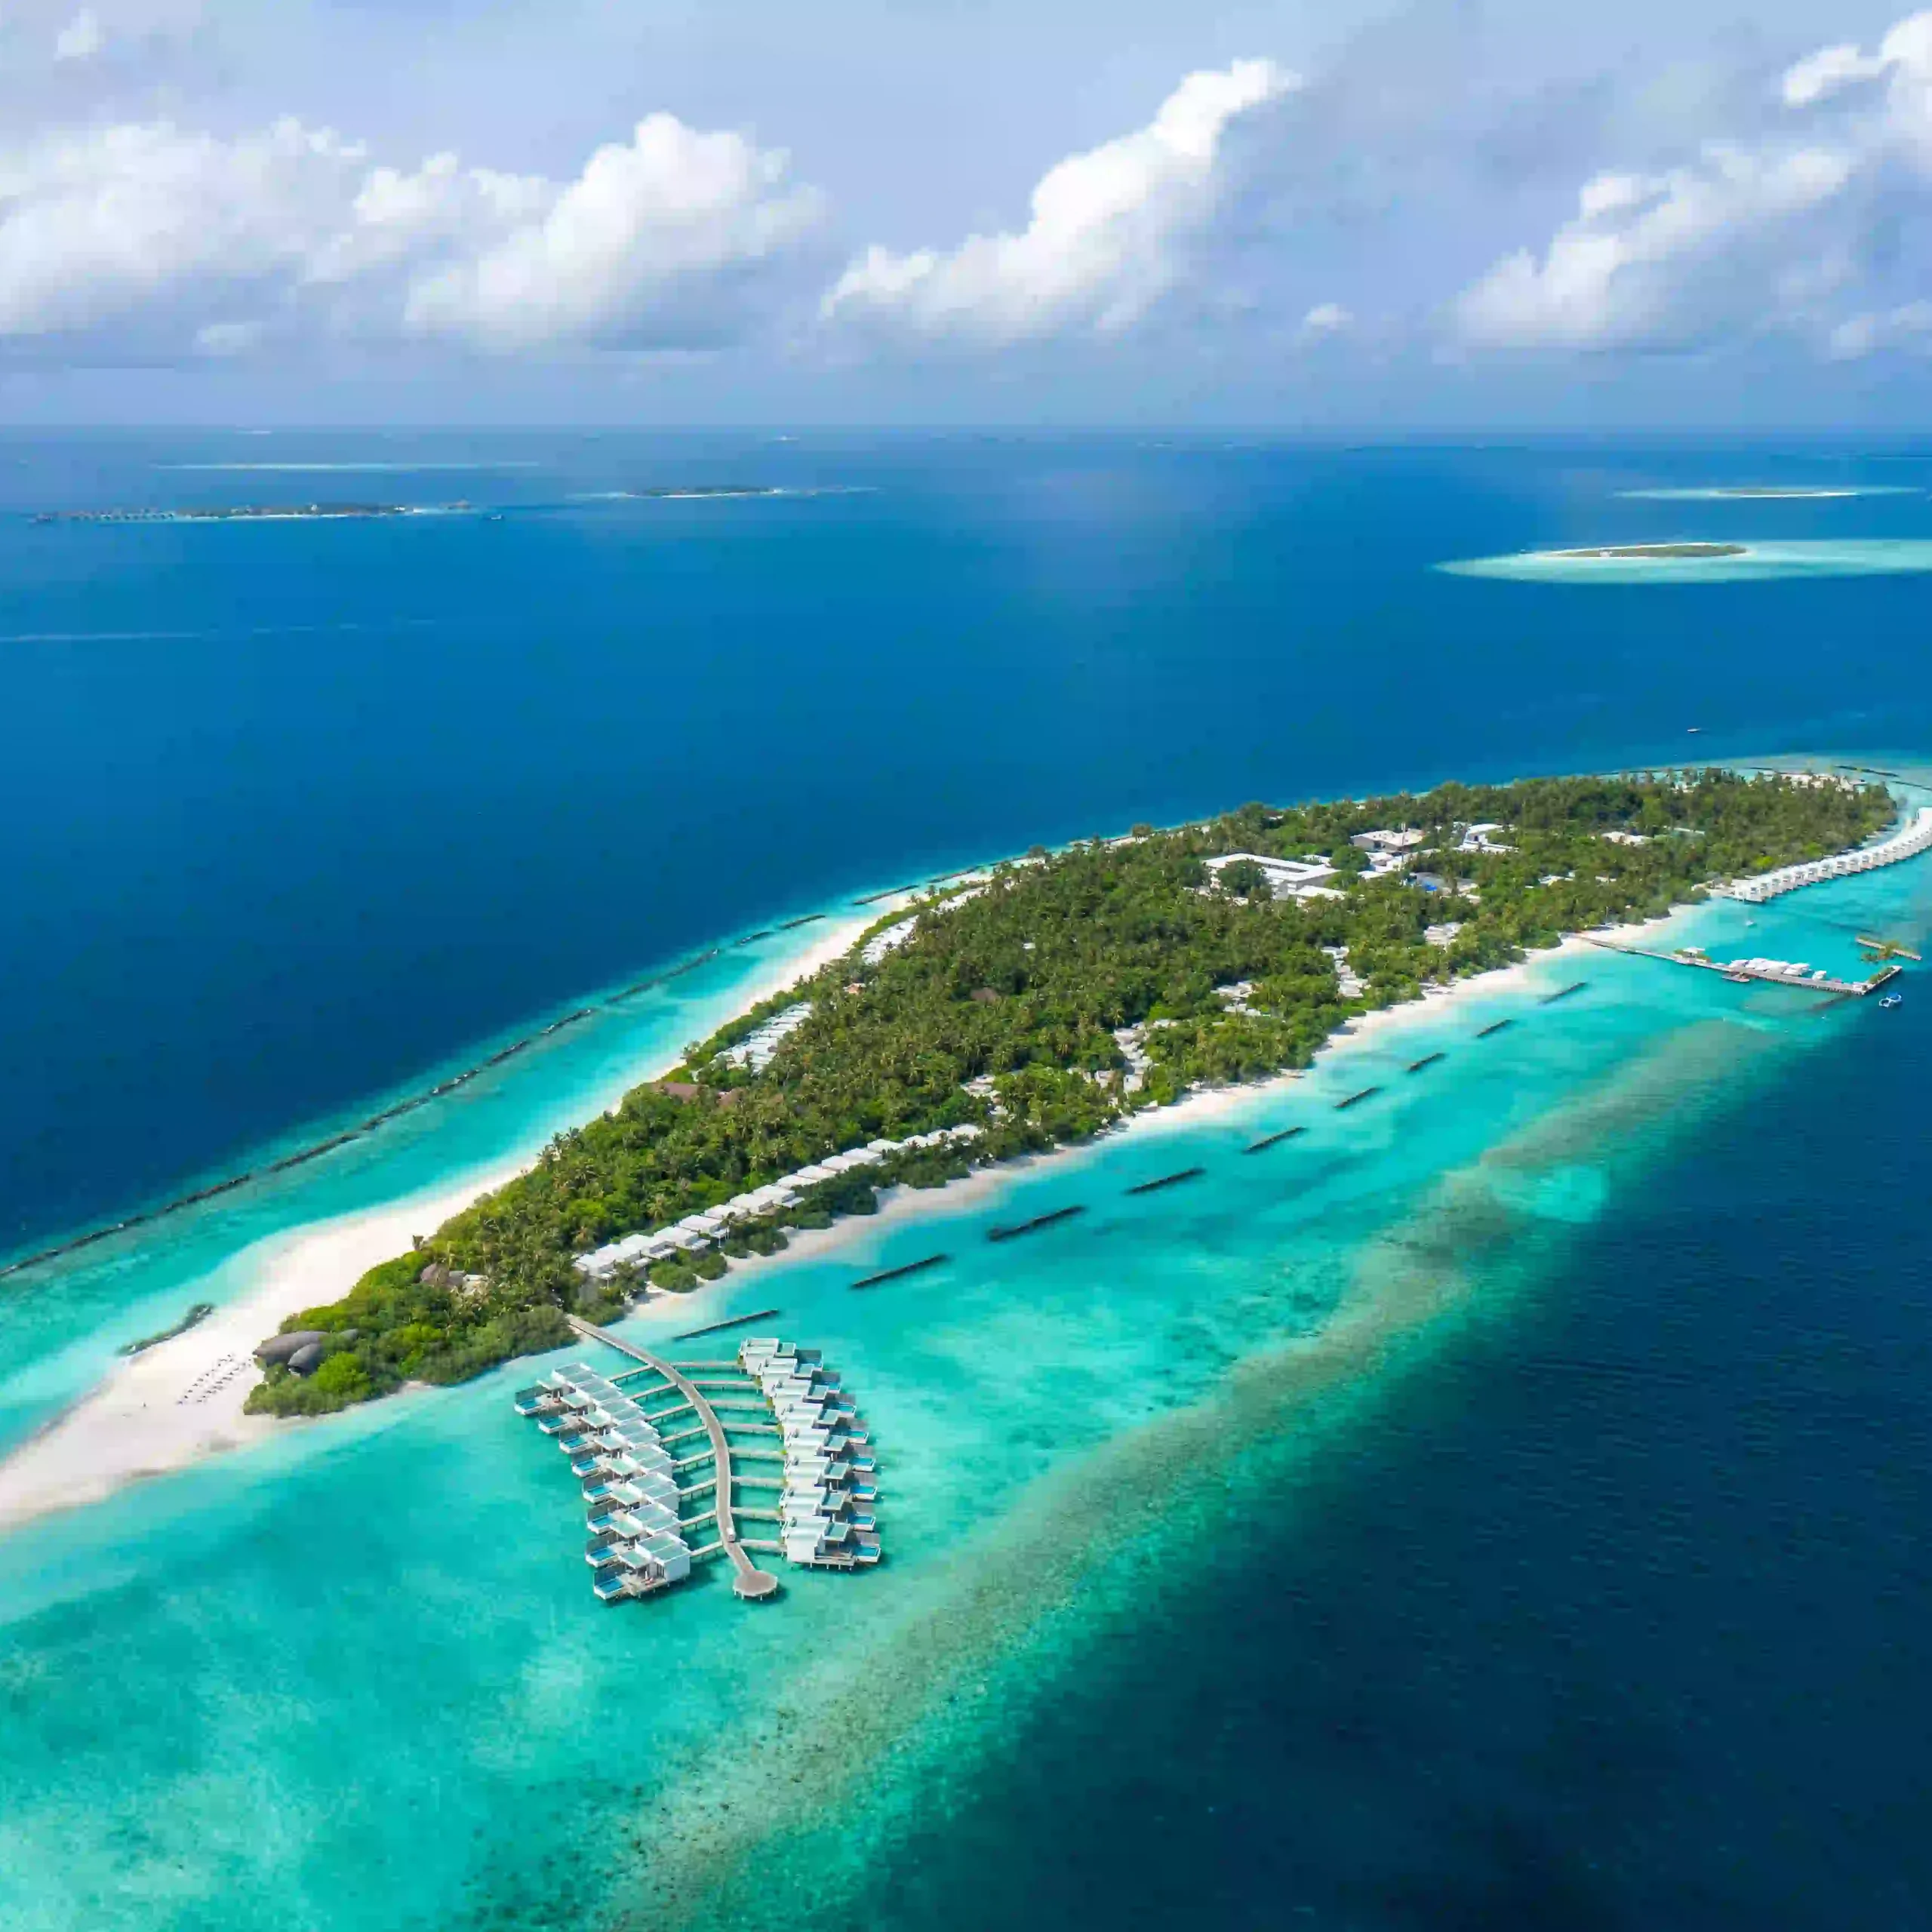 Dhigali Luxury Resort Part of Maldives Package from India